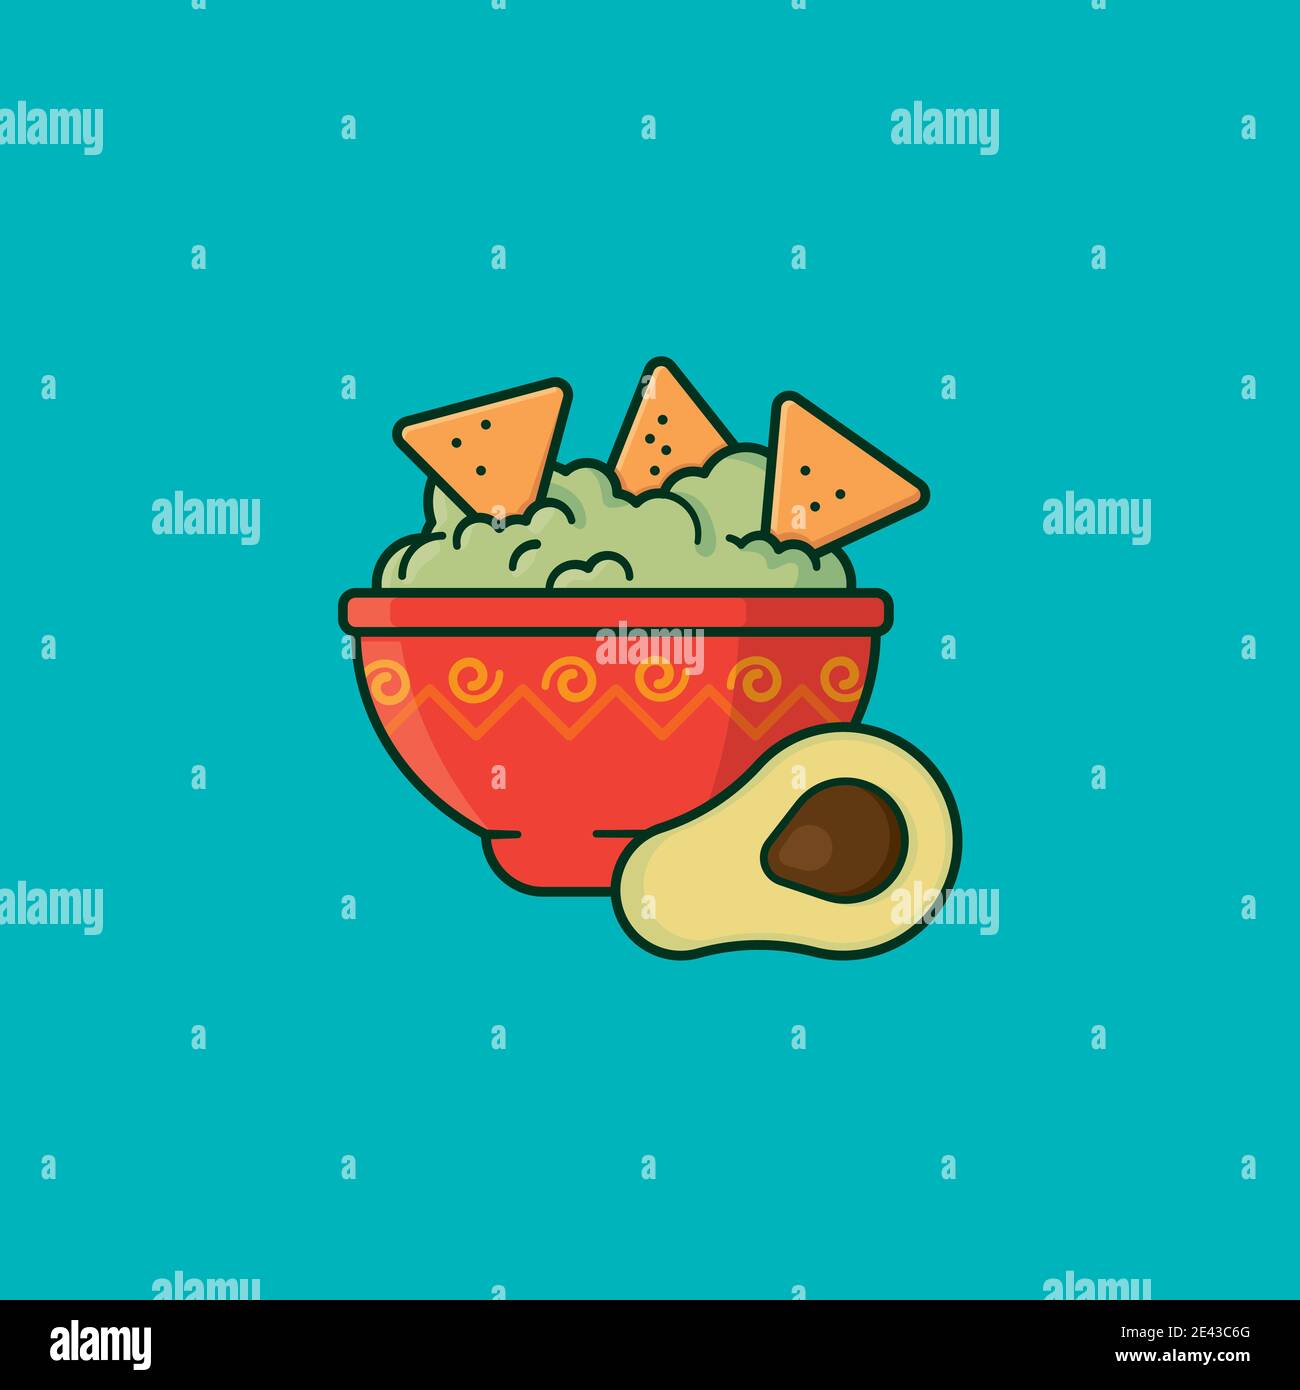 Bowl of Guacamole with tortilla chips and half Avocado vector illustration for Guacamole Day on September 16. Stock Vector